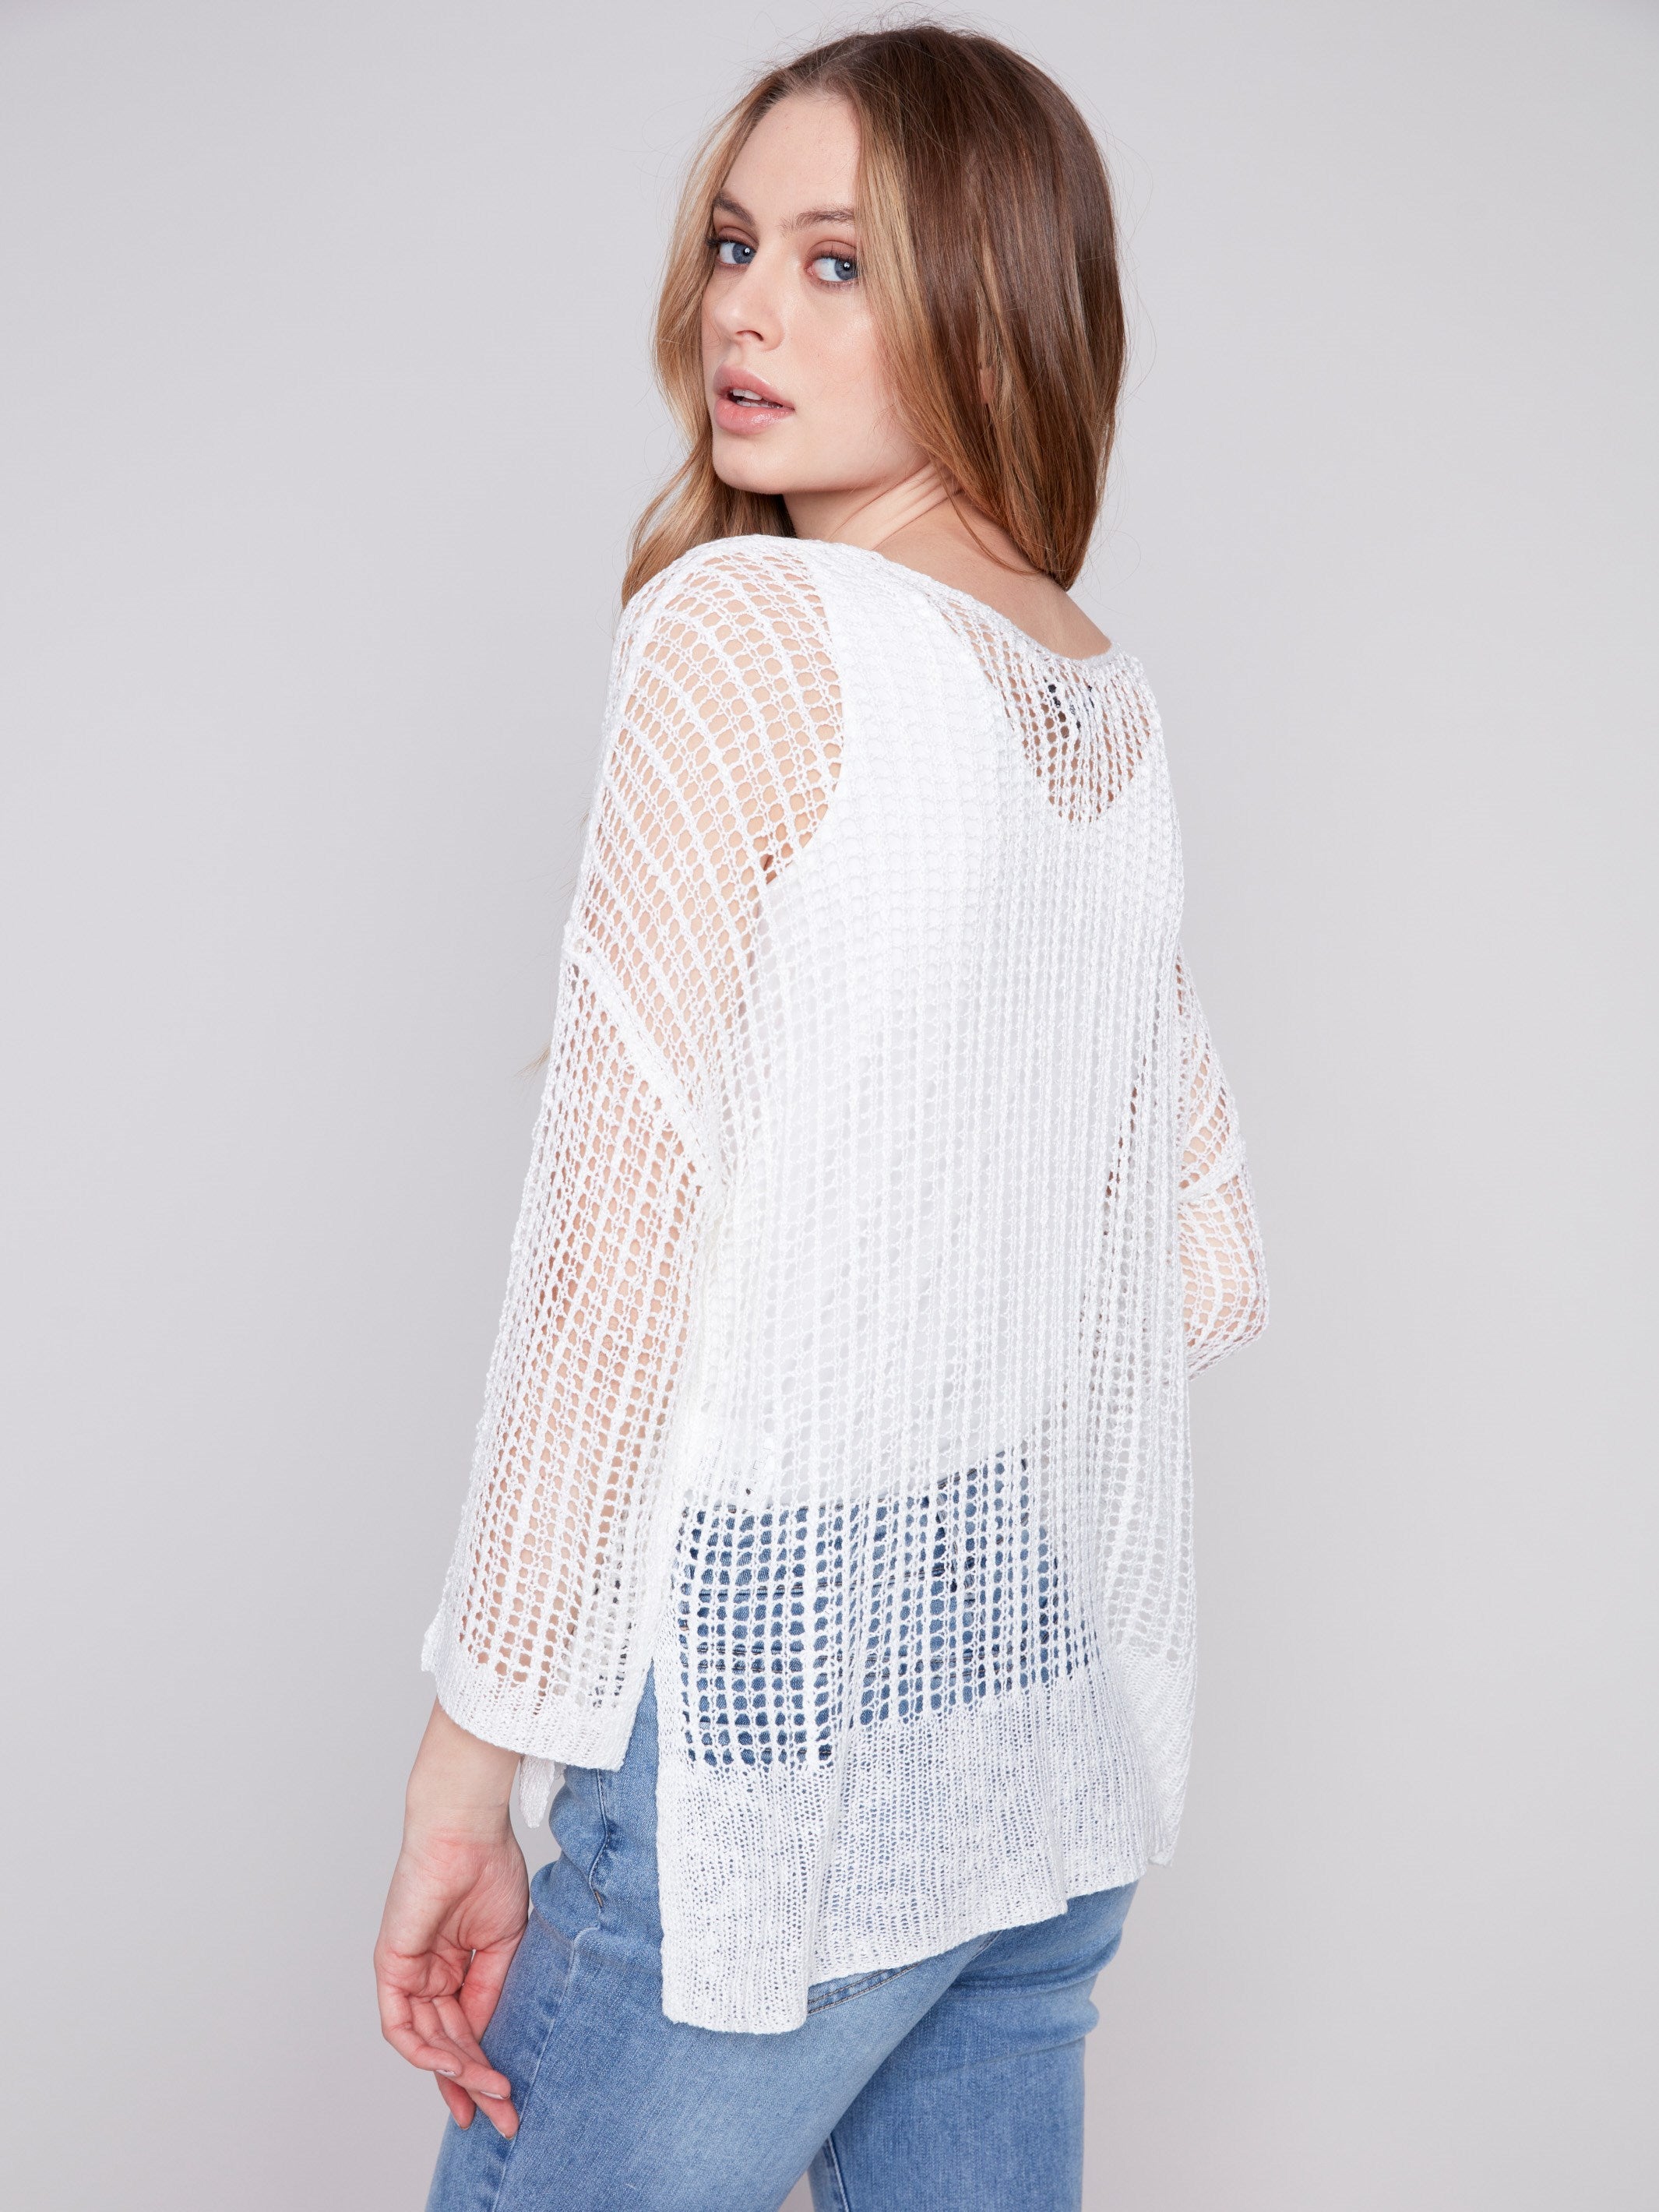 Fishnet Crochet Sweater - White - Charlie B Collection Canada - Image 2